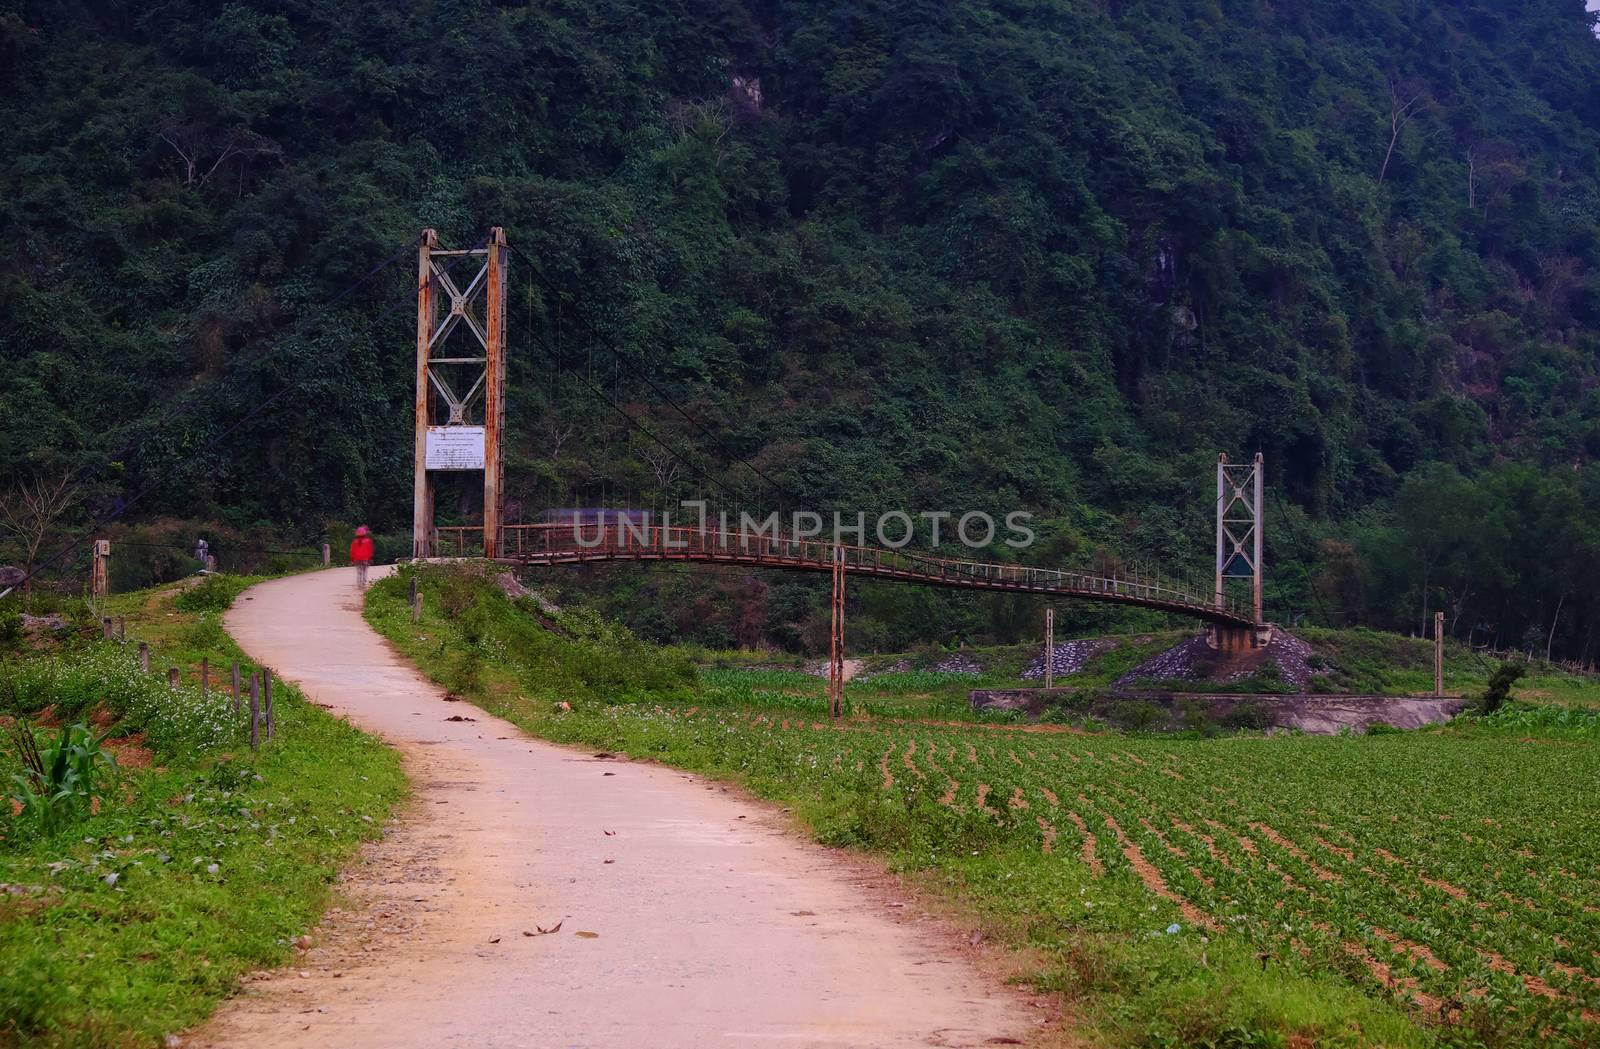 Beautiful of Quang Binh countryside landscape at evening, amazing mountain, bridge to path among green field, calm village at QuangBinh, Vietnam, a nice view for travel